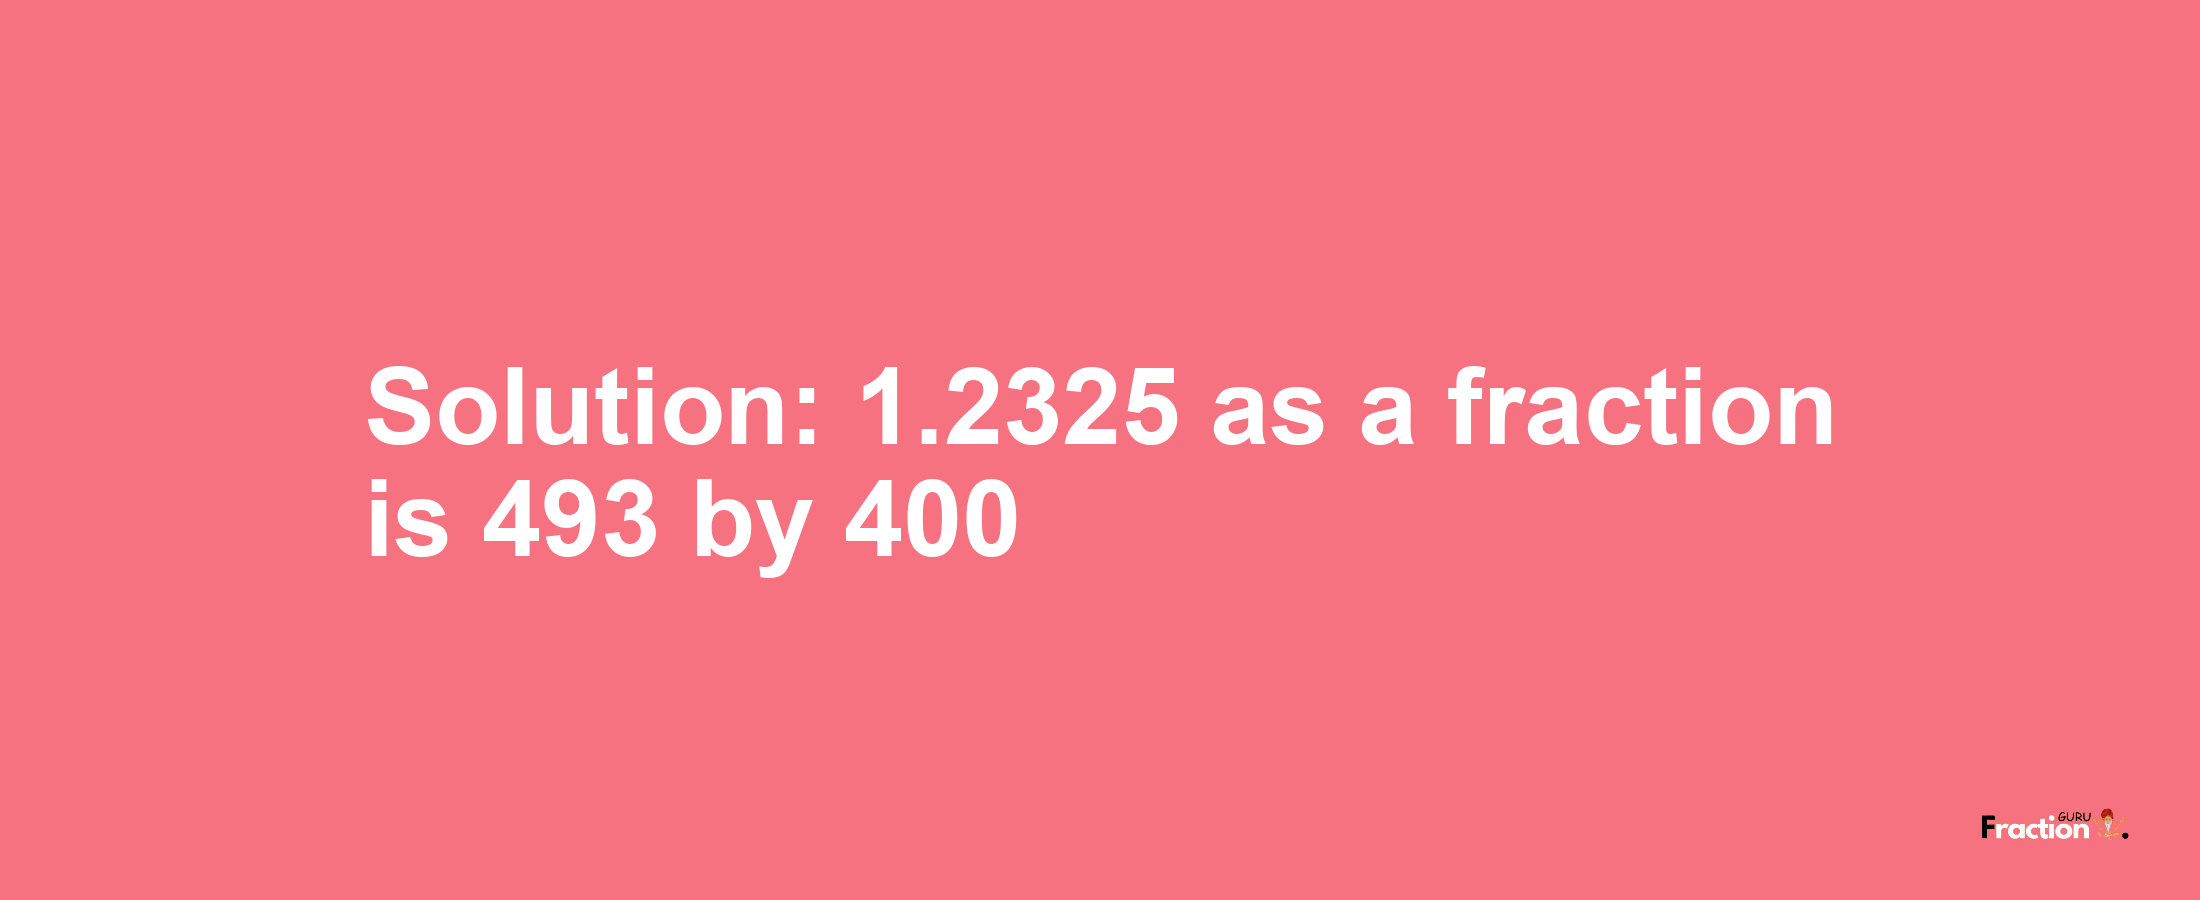 Solution:1.2325 as a fraction is 493/400